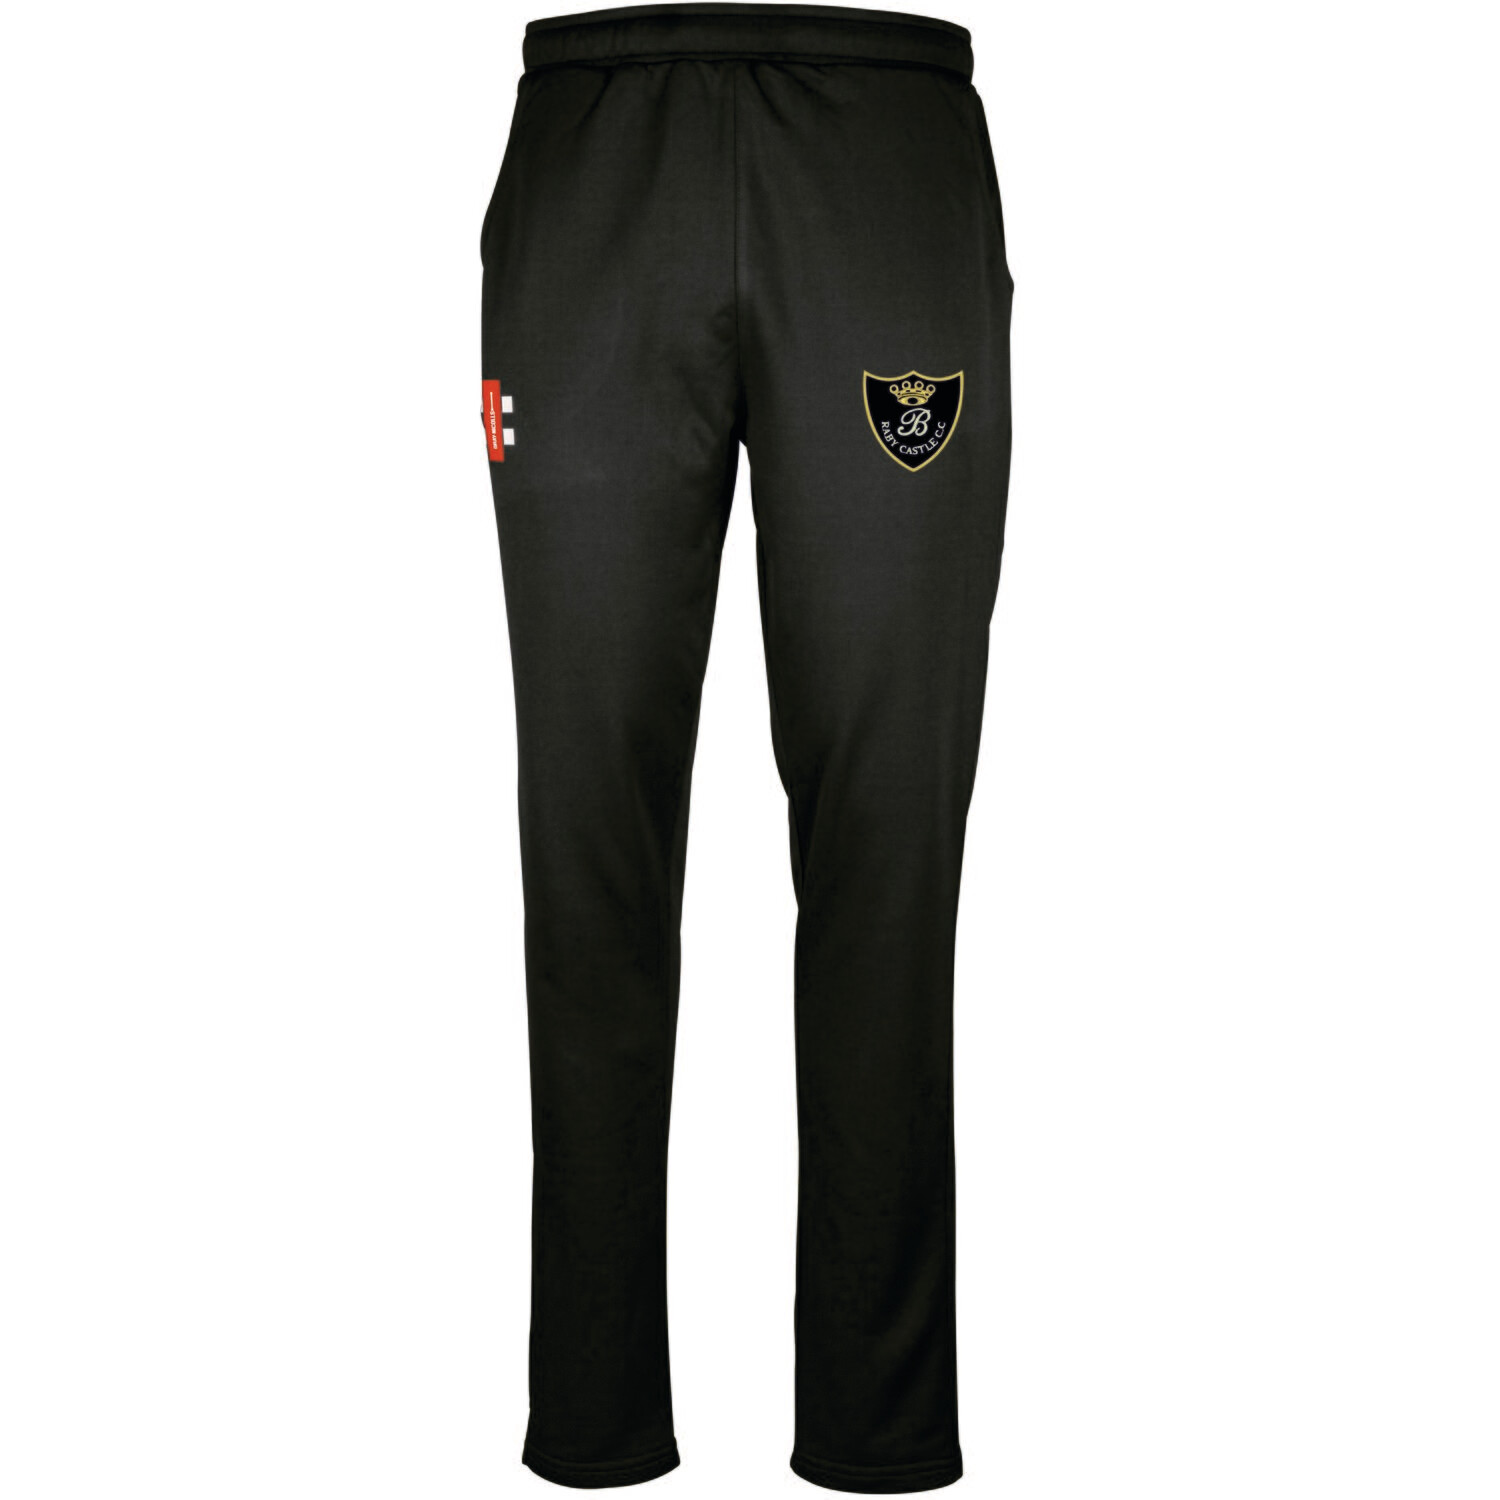 Raby Castle Junior Pro Performance Playing Trouser